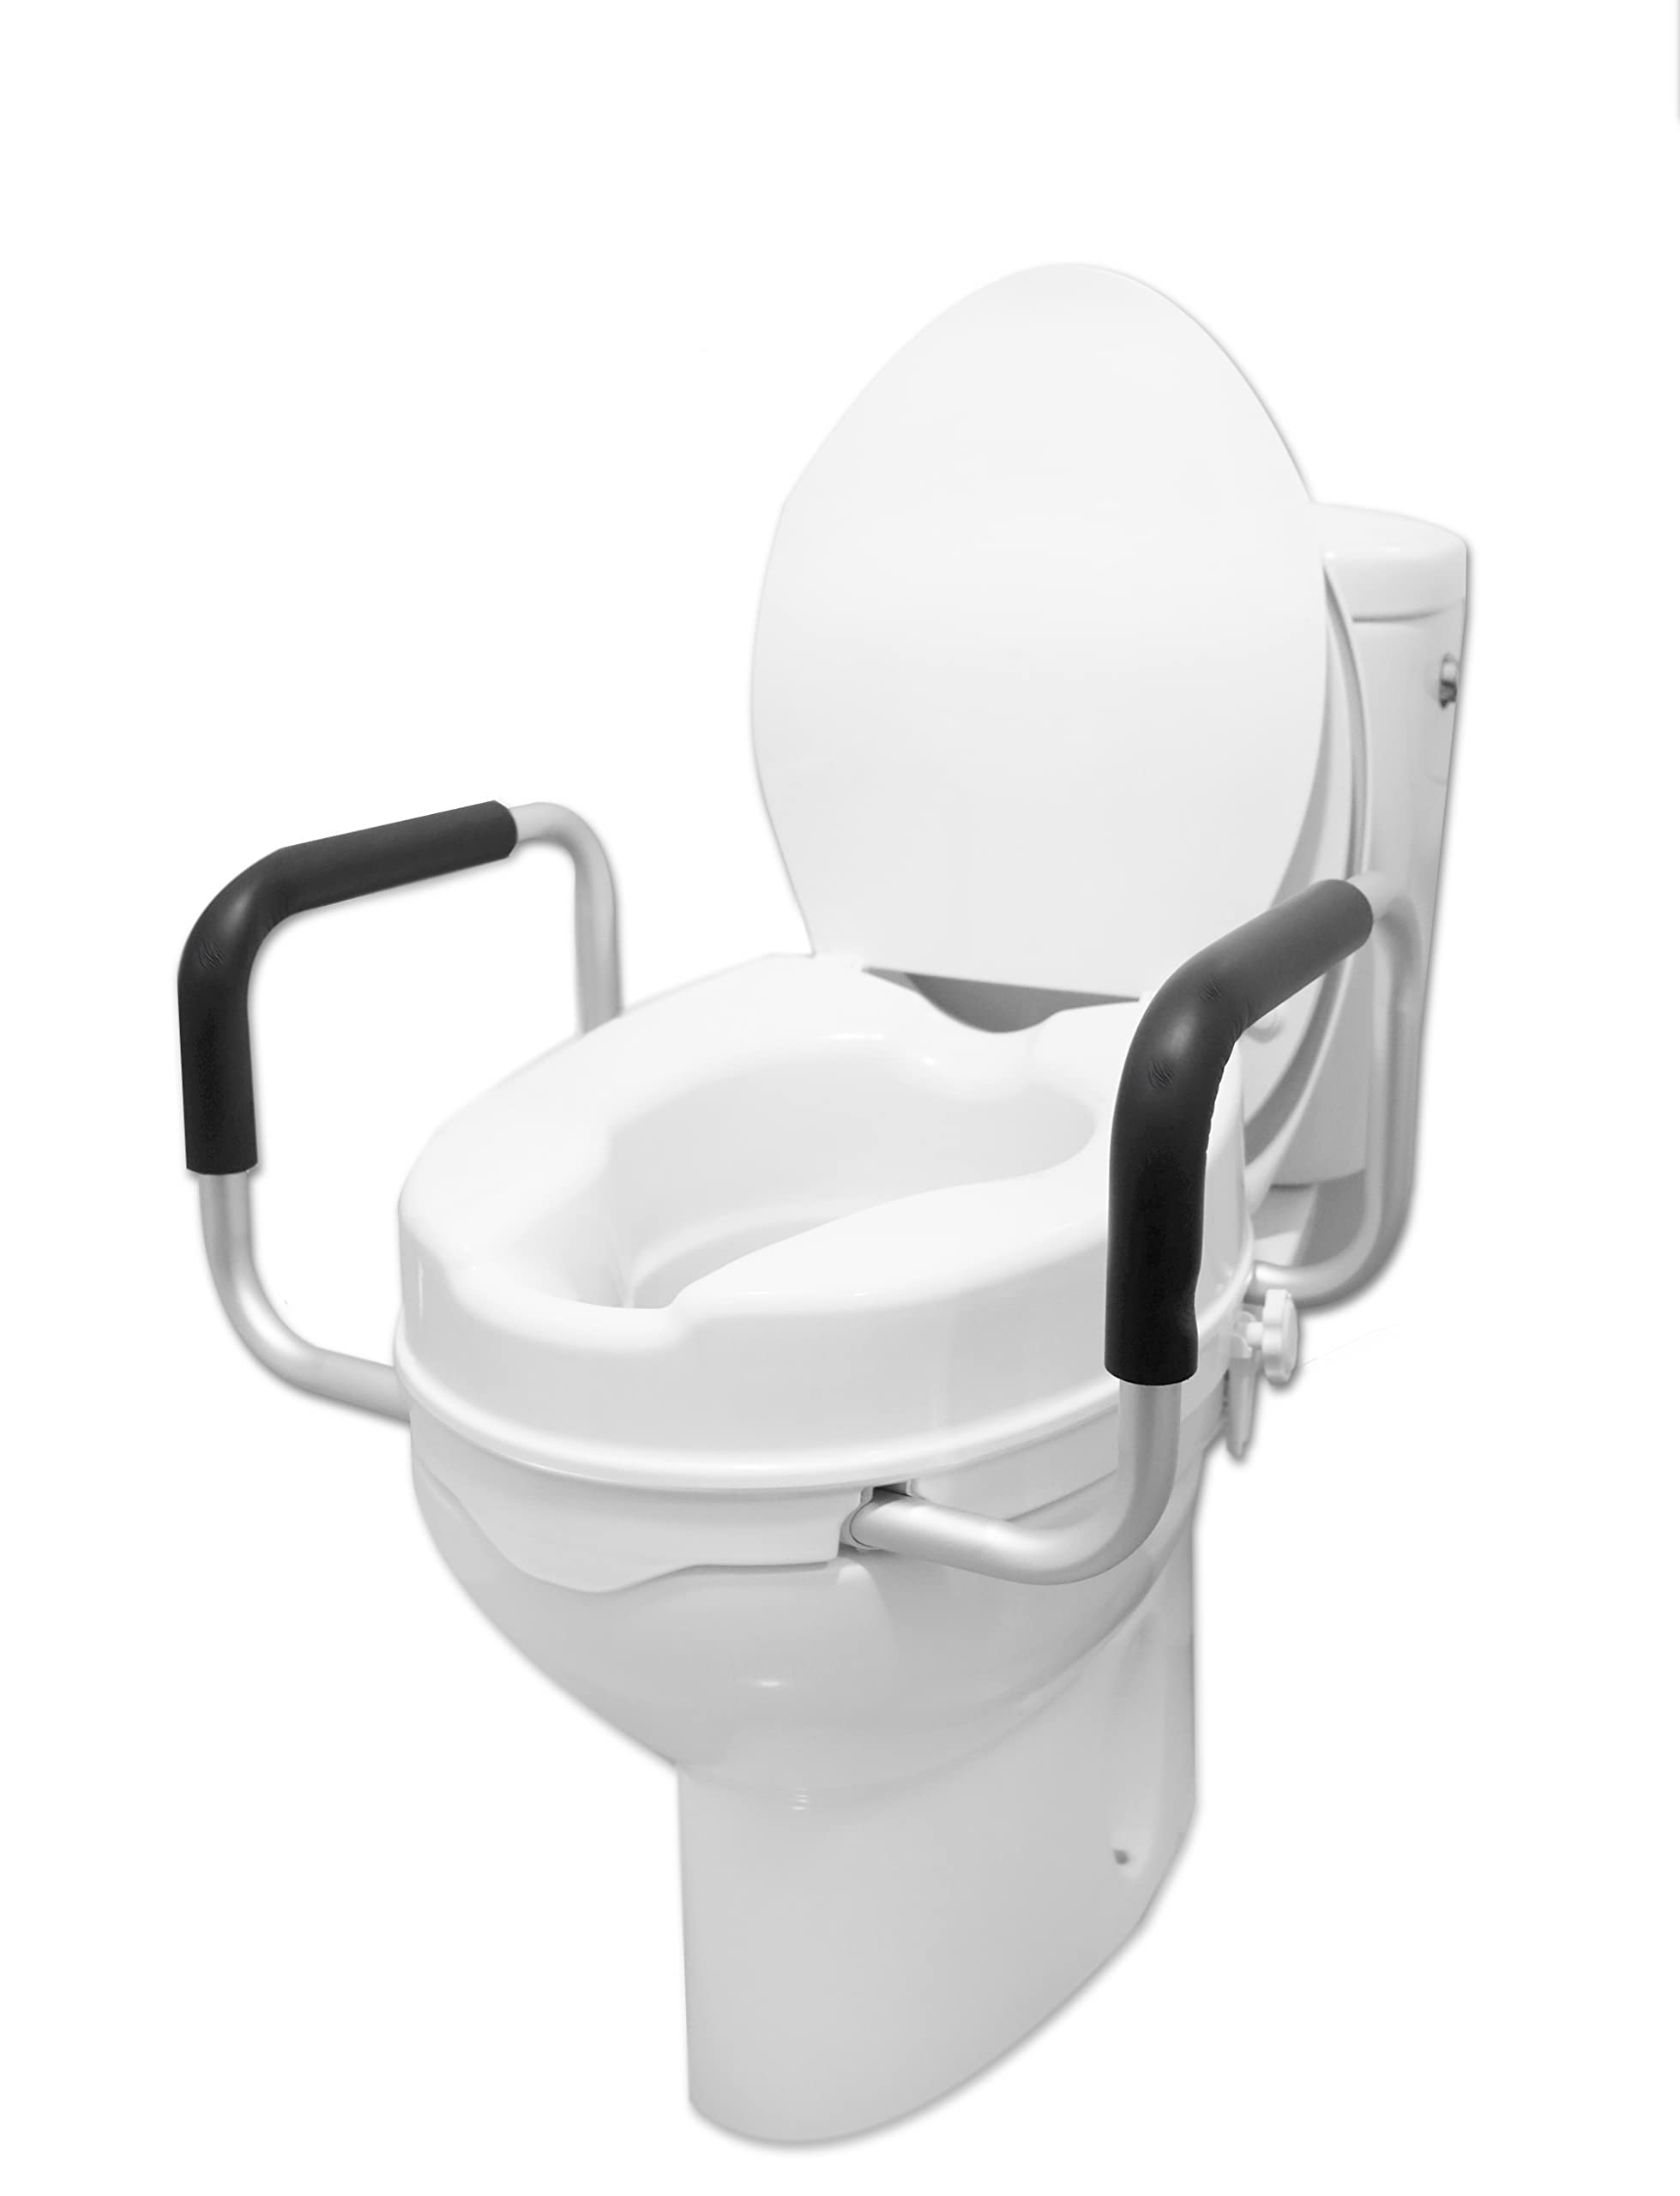 door furniture for disabled toilets Toilet raised seats elderly disabled risers seat toilets riser elevating